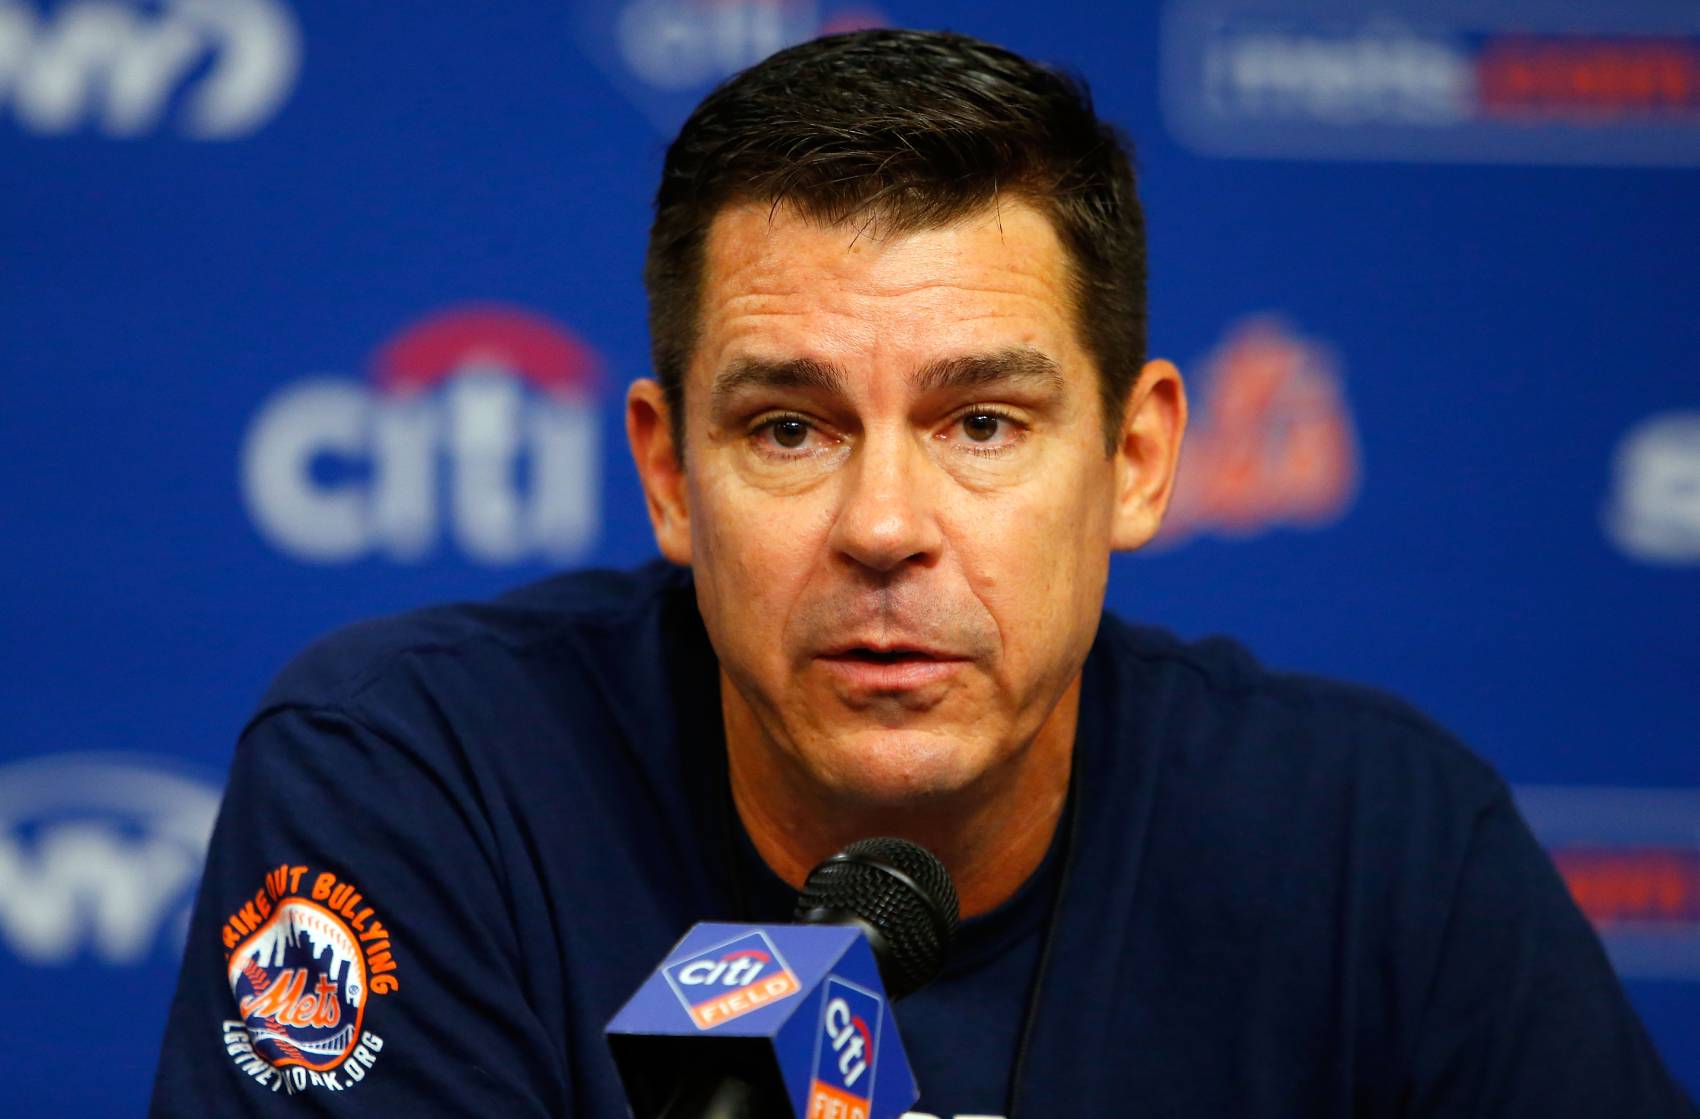 Billy Bean Didn’t Need a .226 Career Average to Make a Lasting Impact on Baseball